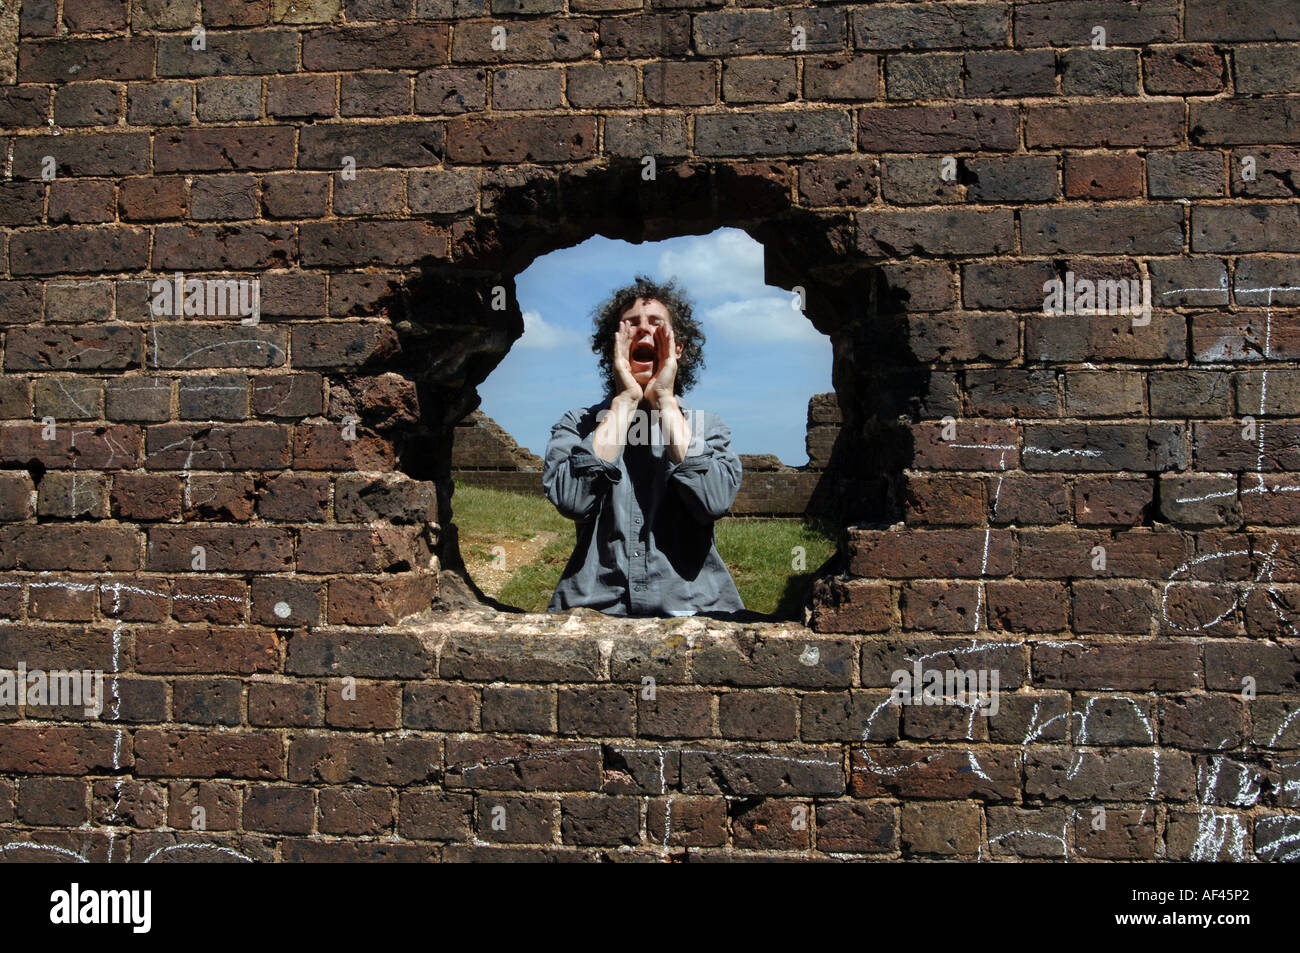 Composer and director of The Shout choir Orlando Gough shouting through a hole in a wall. Stock Photo